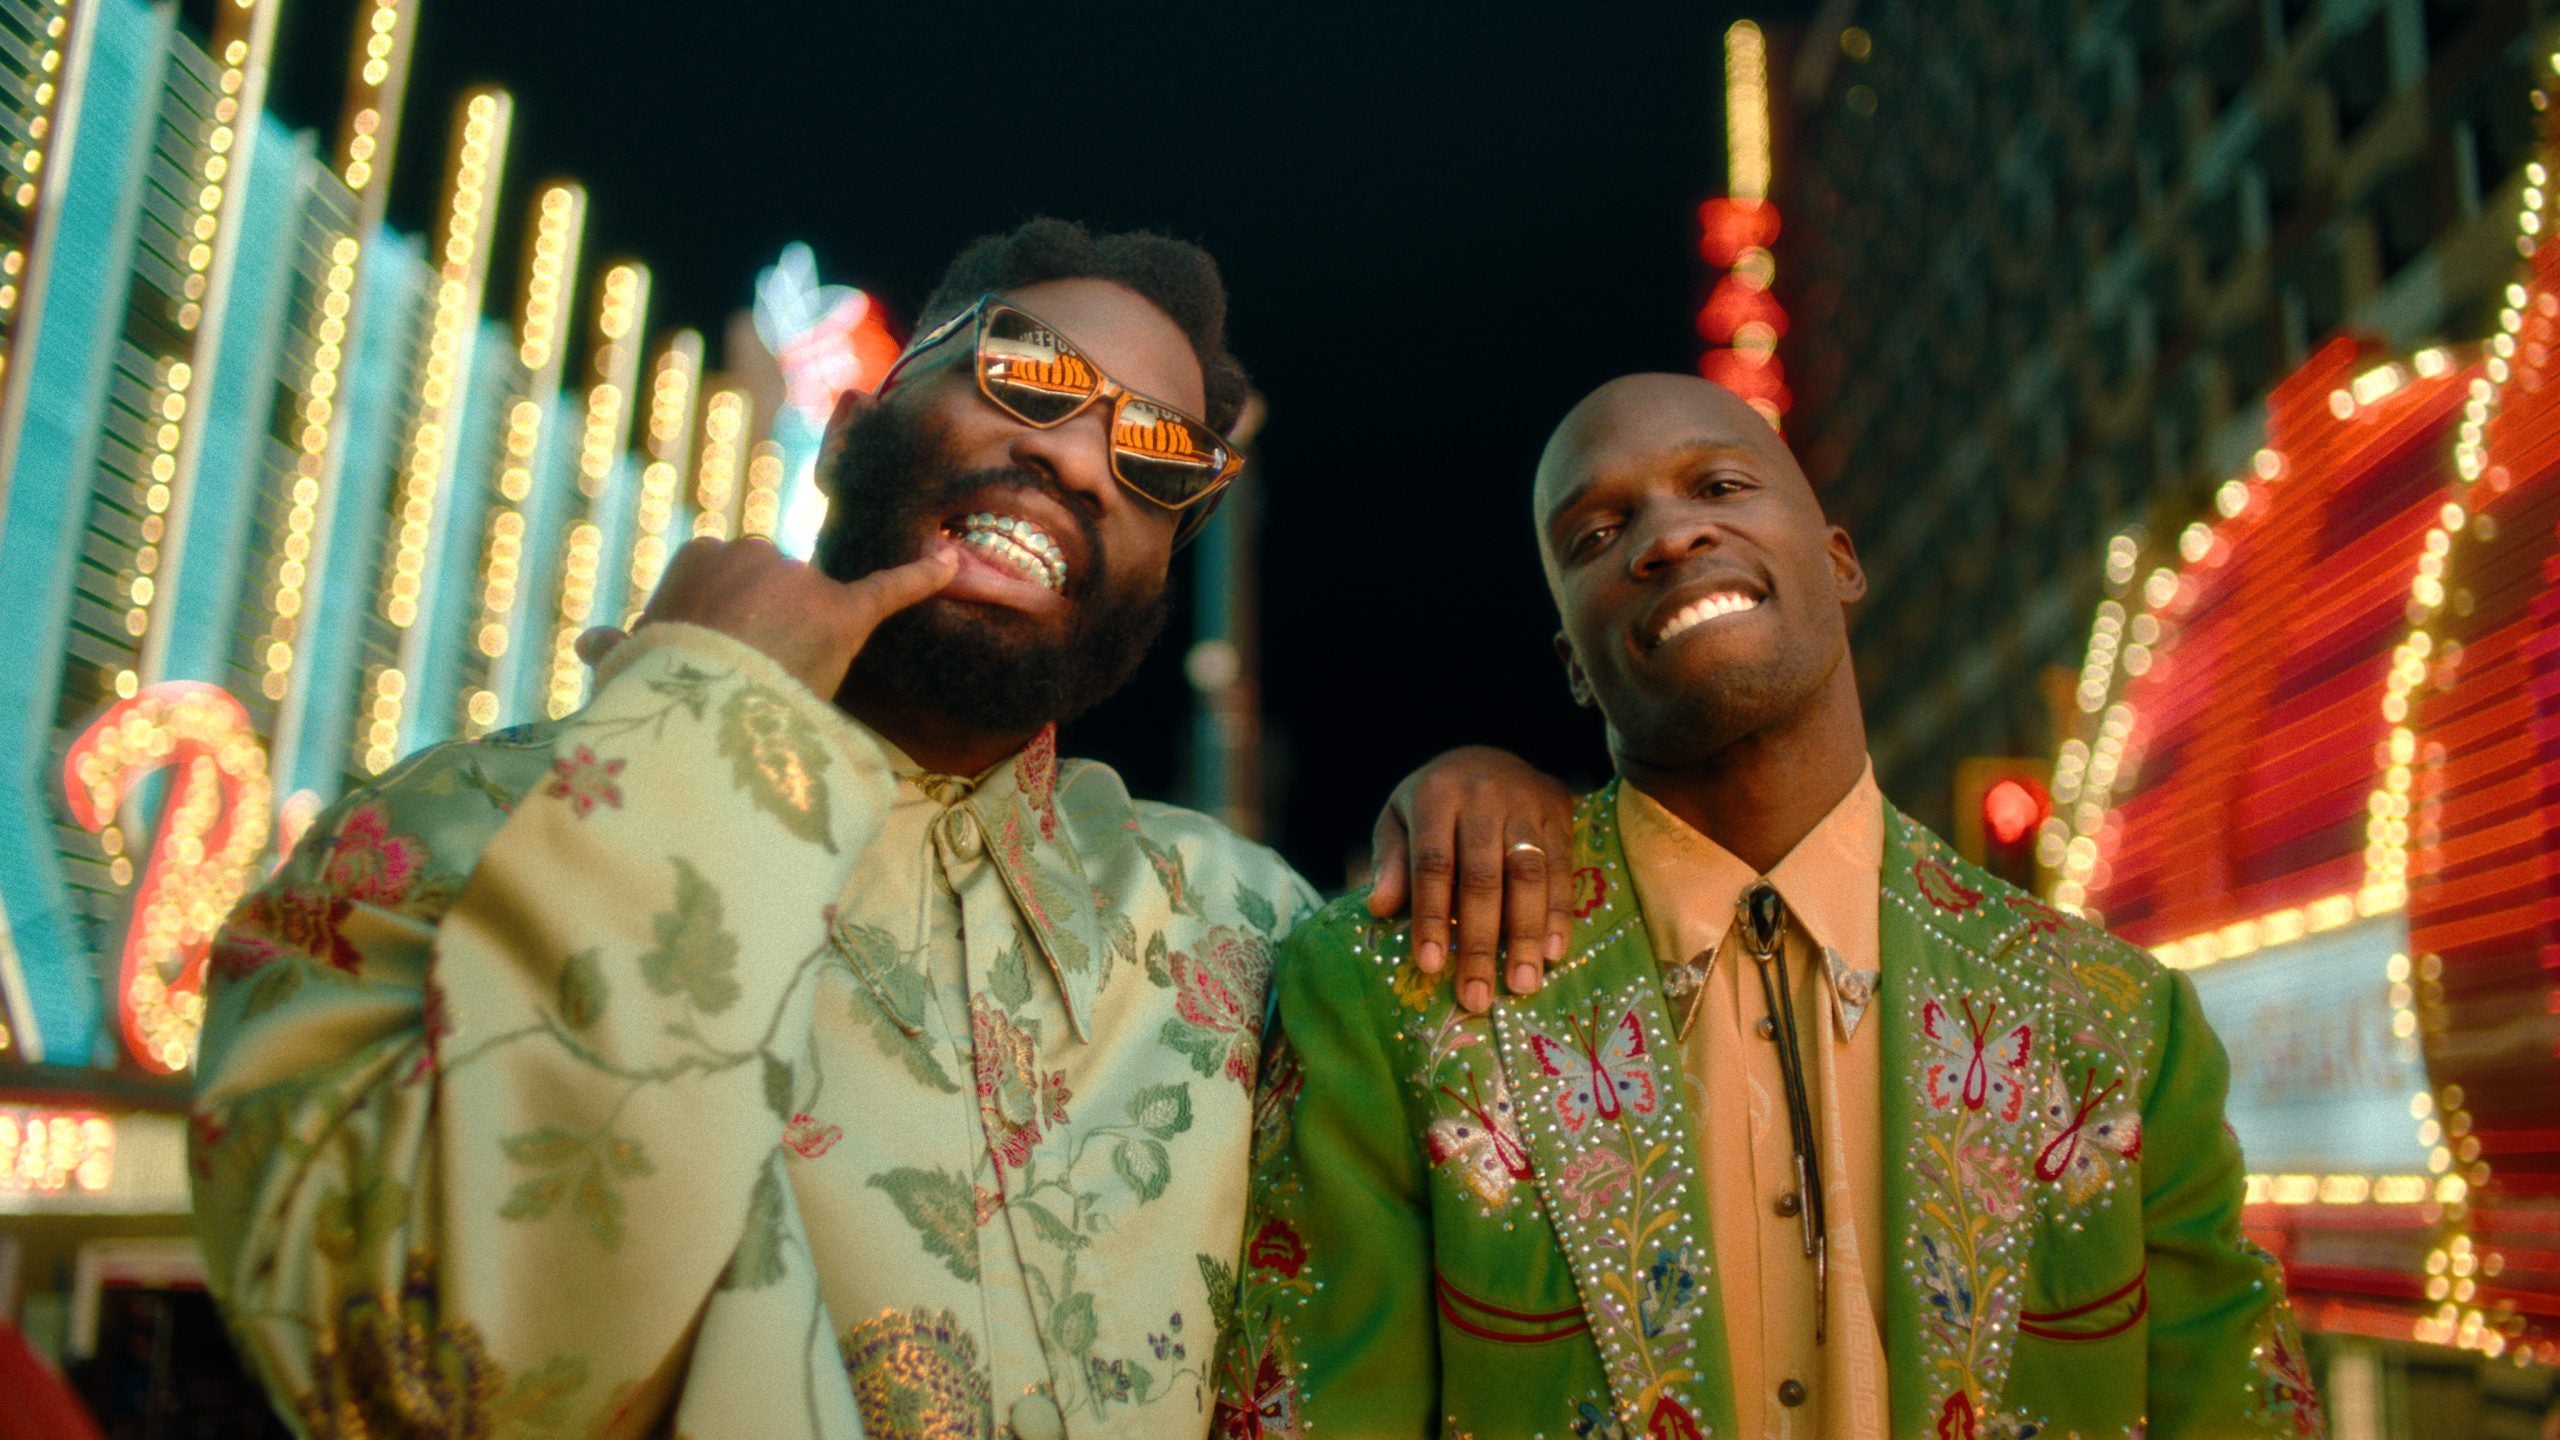 Tobe Nwigwe And Chad “Ochocinco” Johnson Kick Off The Super Bowl With “Excessive Celebration (Touchdown in Vegas)” Campaign Rap